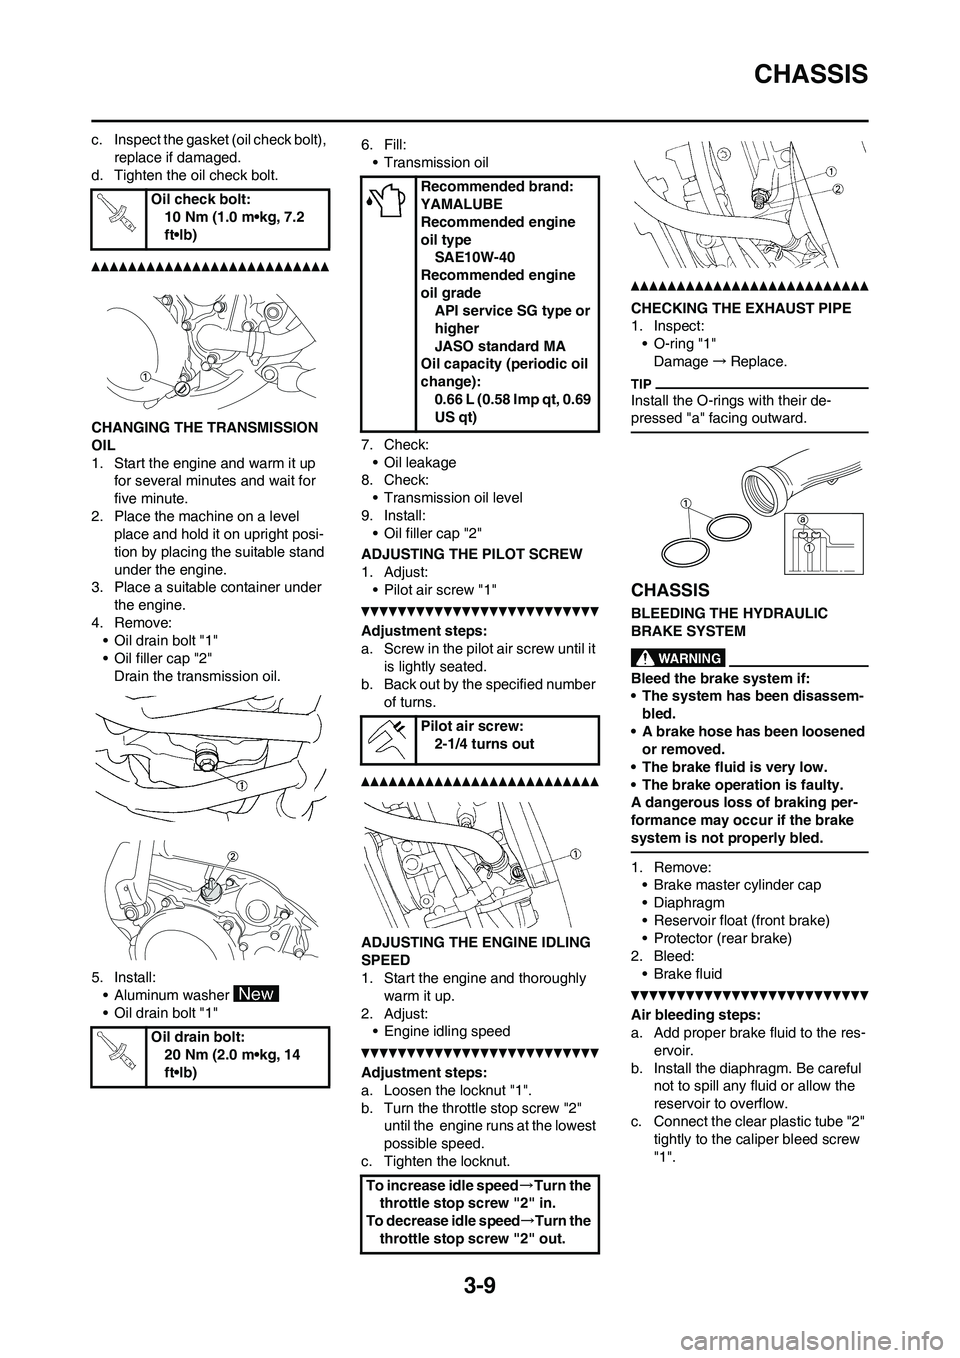 YAMAHA YZ125LC 2010  Owners Manual 3-9
CHASSIS
c. Inspect the gasket (oil check bolt), 
replace if damaged.
d. Tighten the oil check bolt.
CHANGING THE TRANSMISSION 
OIL
1. Start the engine and warm it up 
for several minutes and wait 